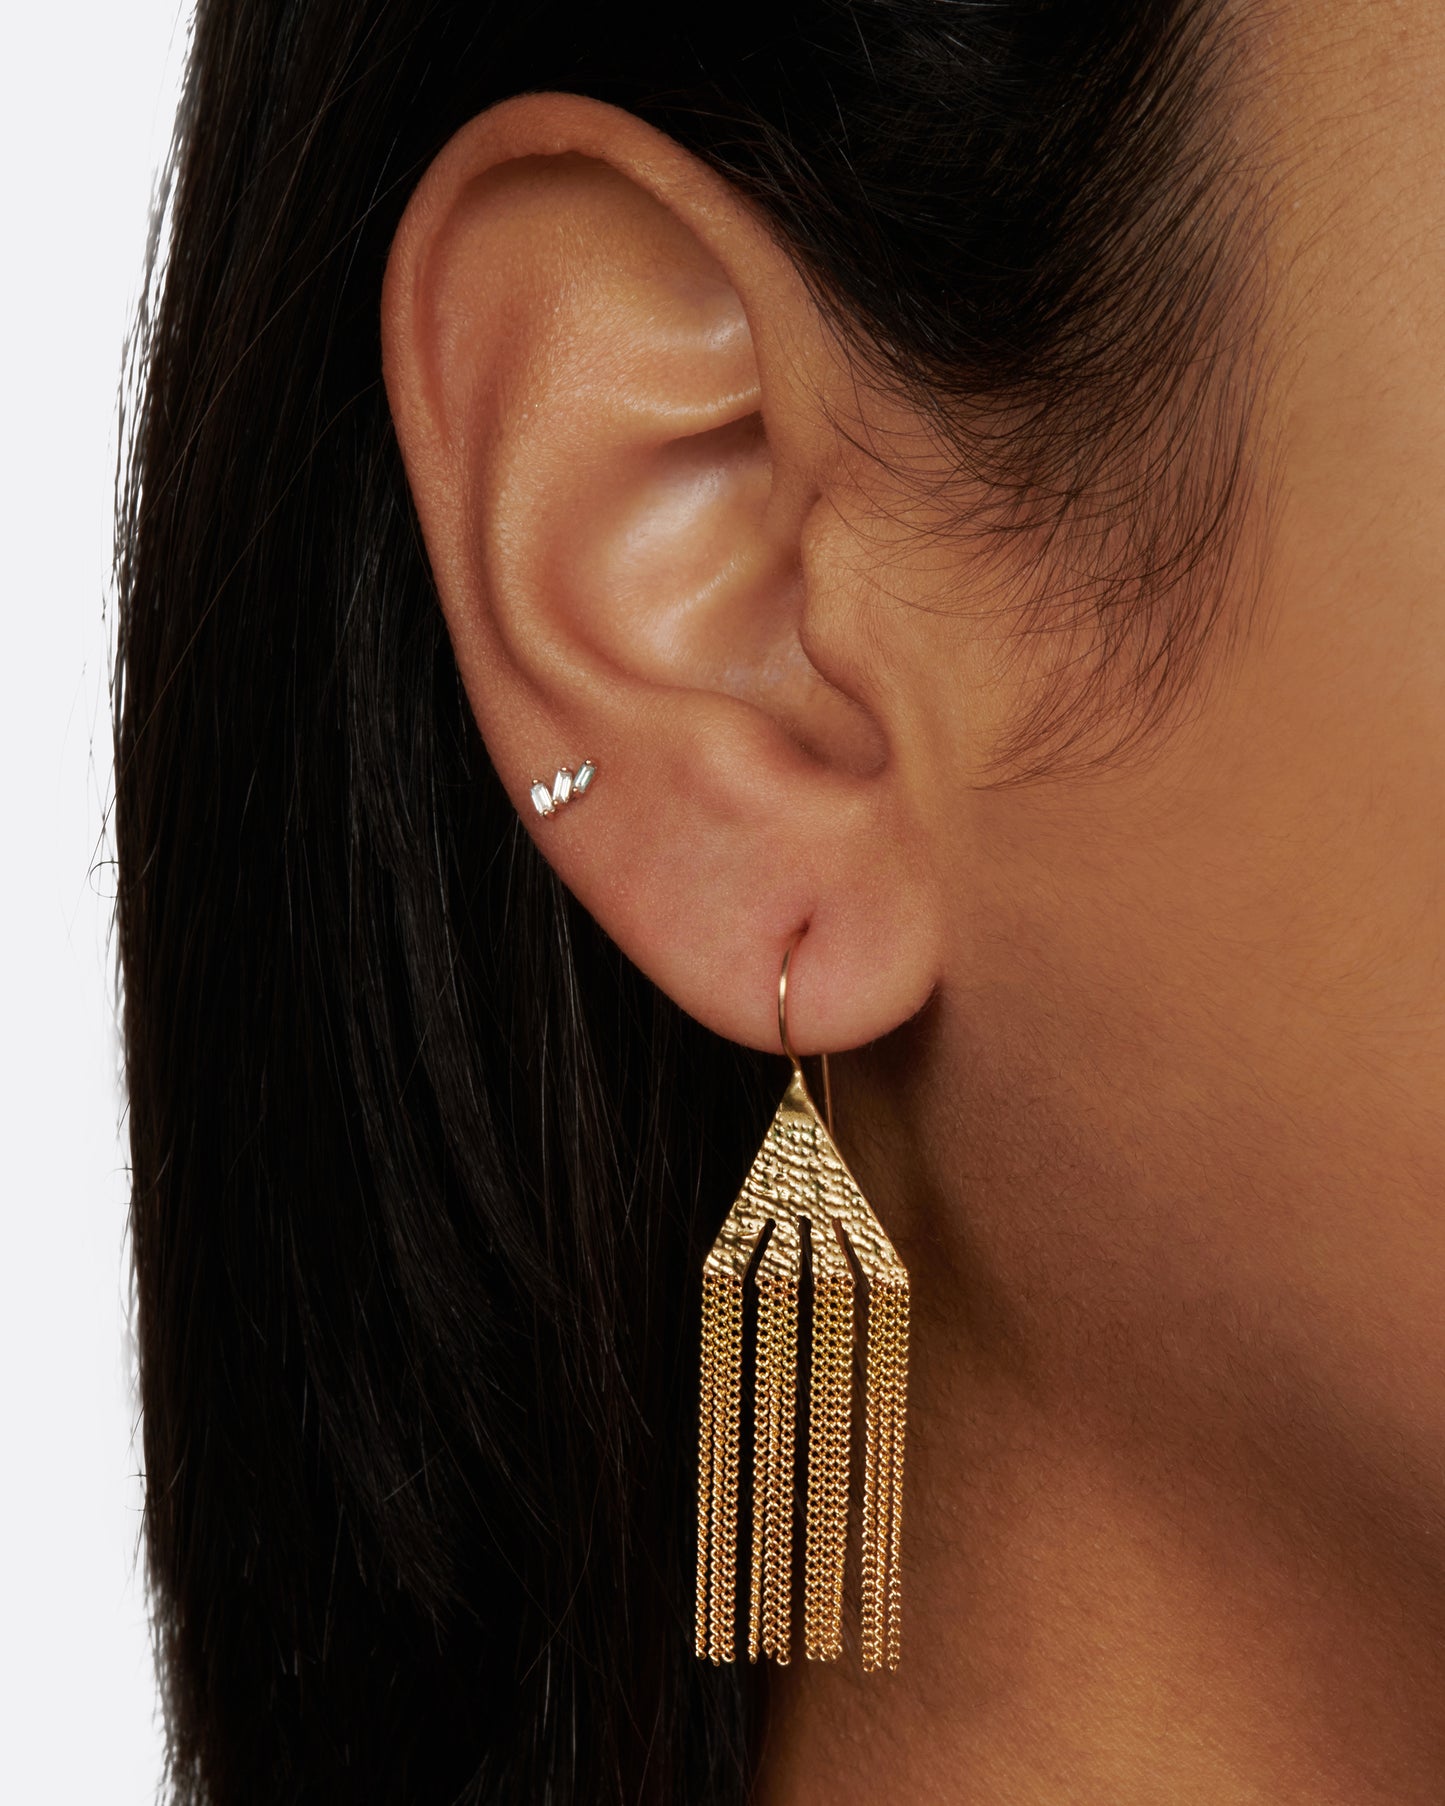 A pair of earrings made of chains with free flowing drops that hang like icicles.